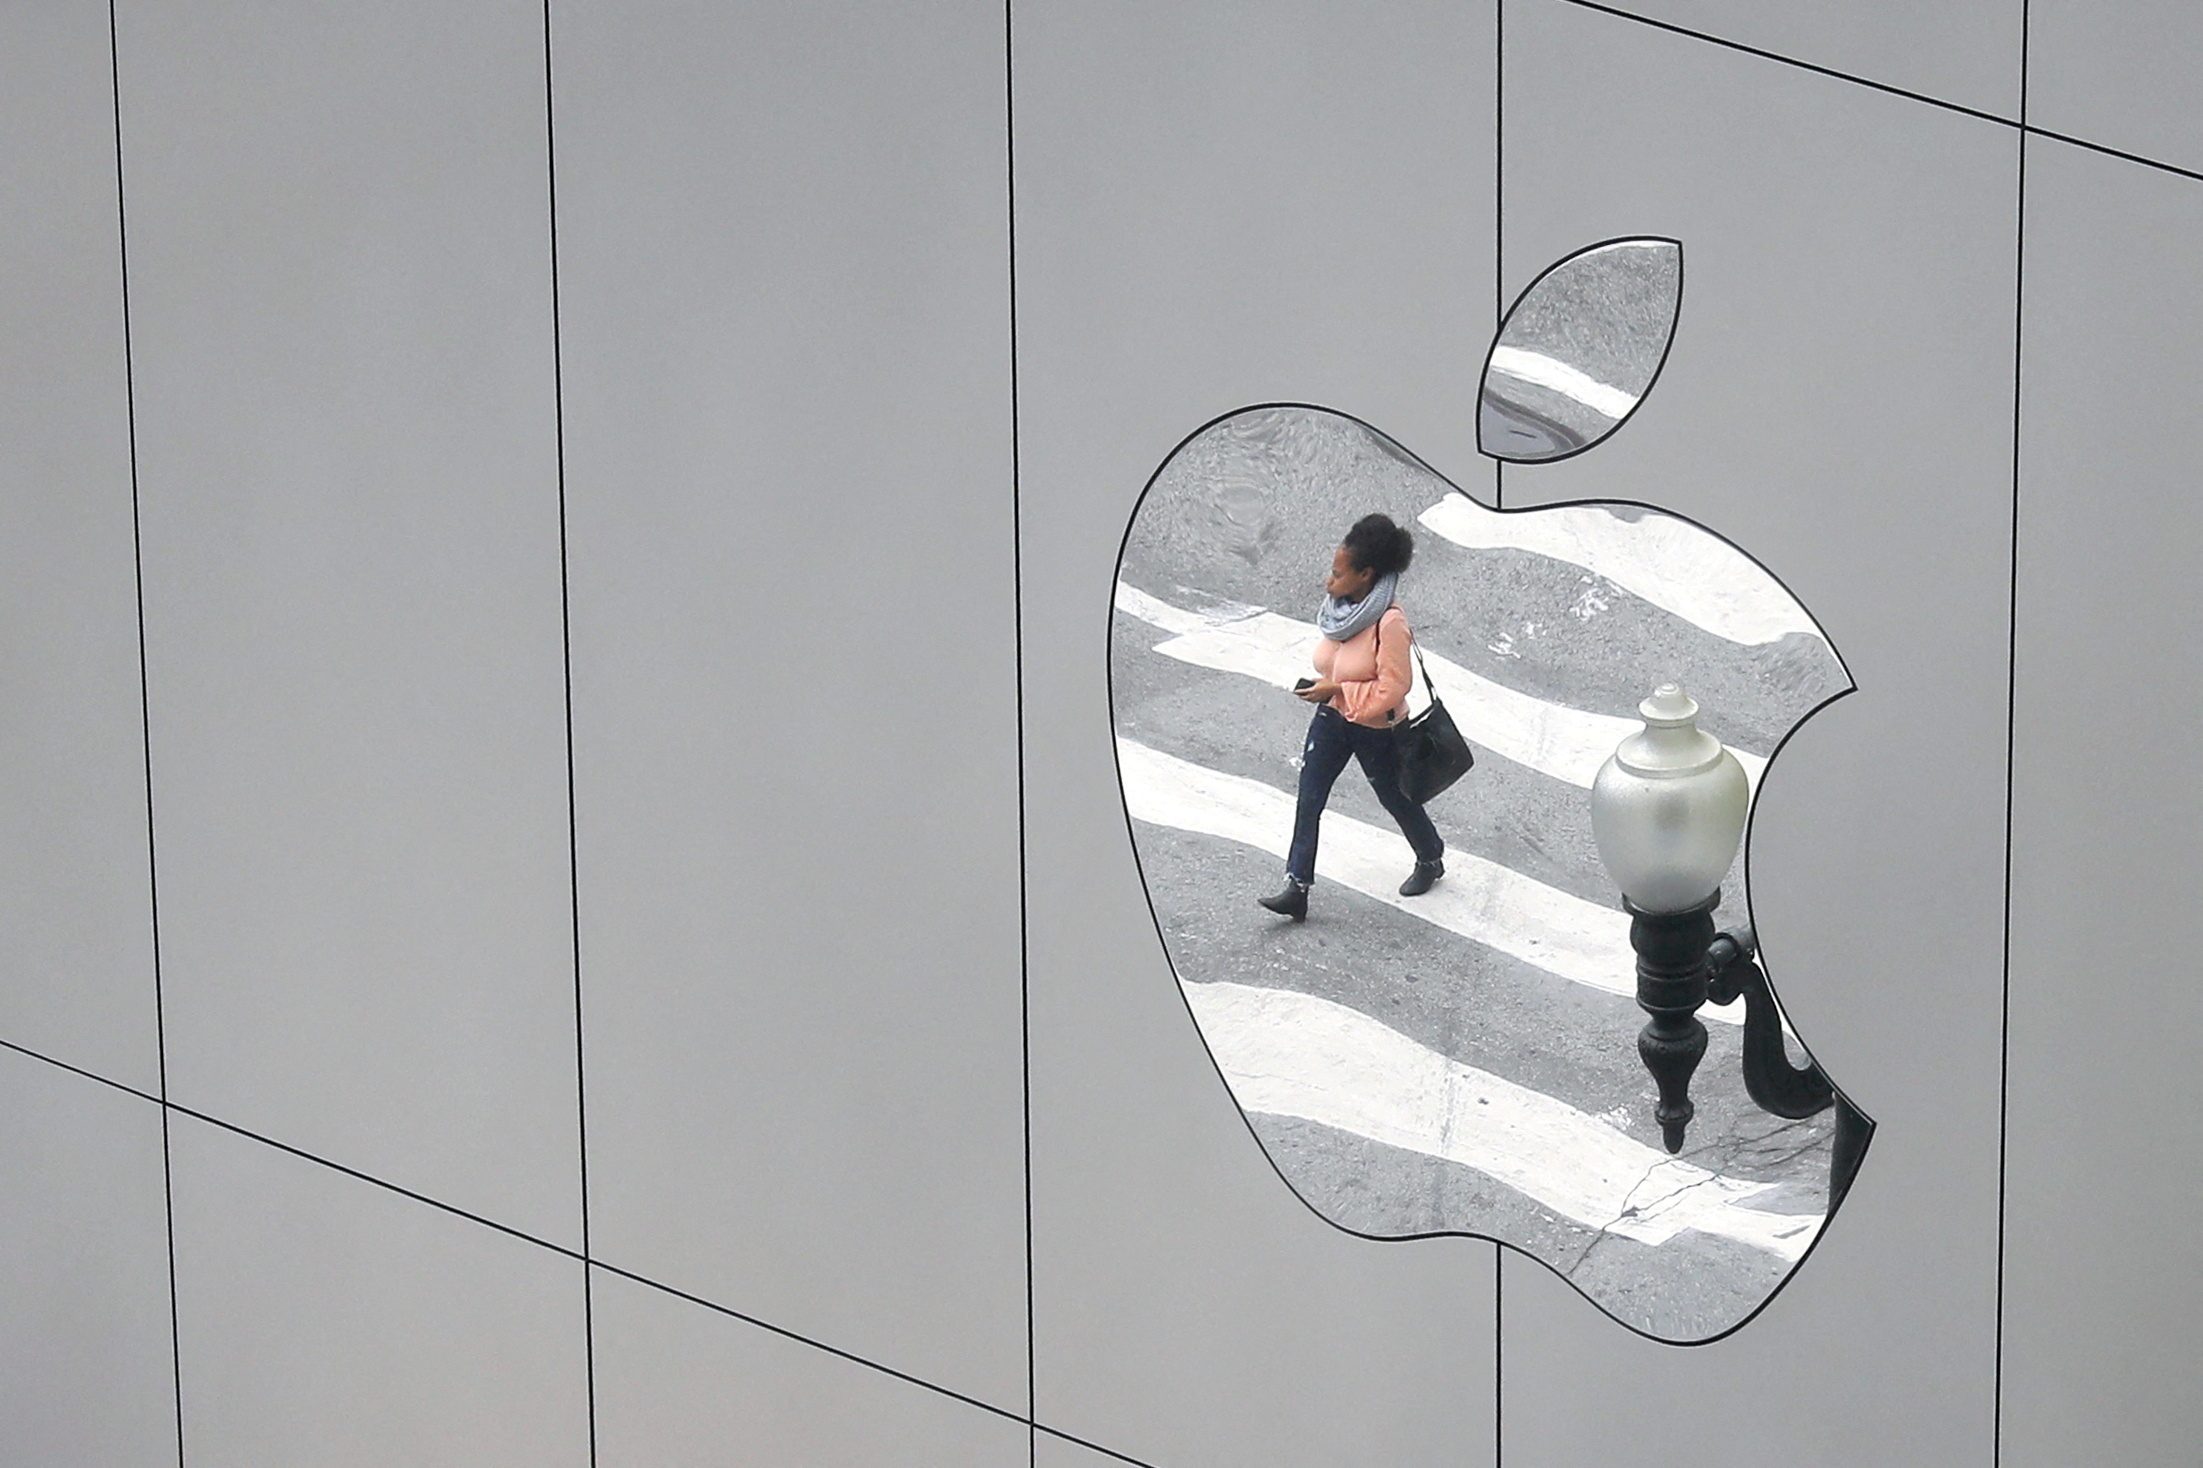 US SEC rejects Apple bid to block shareholder proposal on forced labor – letter